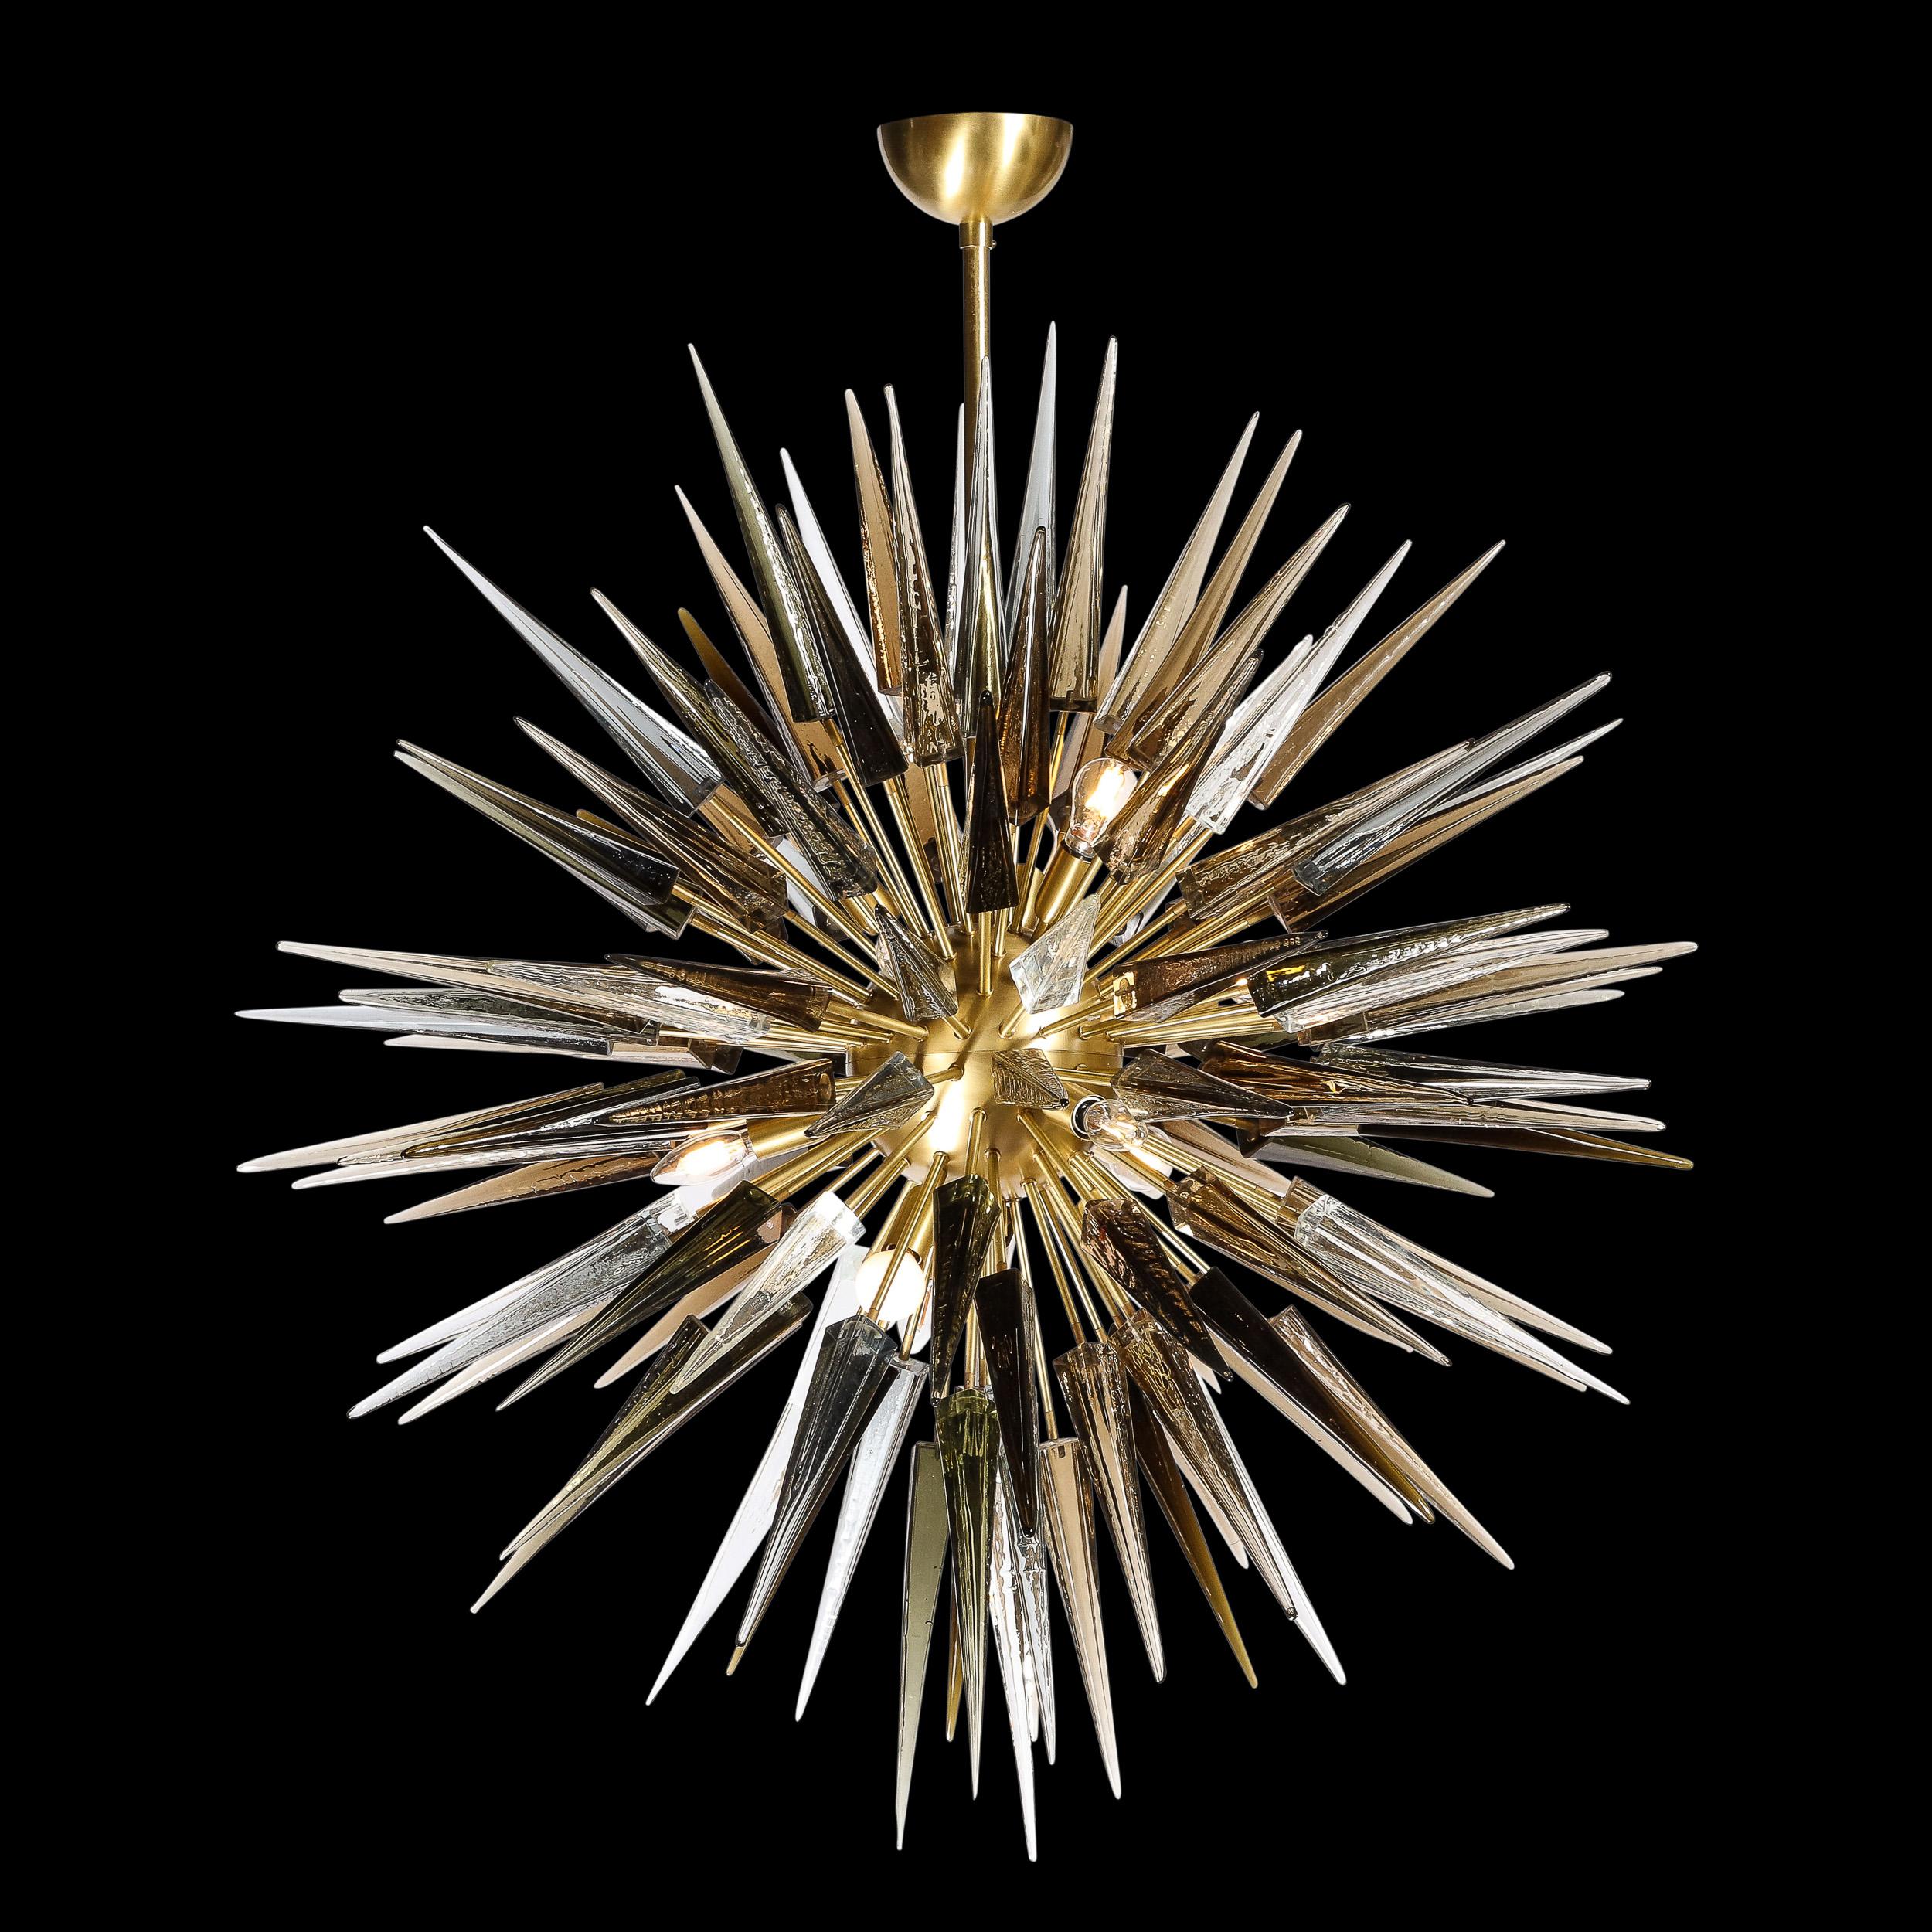 This stunning and graphic modernist chandelier was realized in Murano, Italy- the islands off the coast of Venice renowned for centuries for their superlative quality glass. It features an abundance of handblown Murano glass obelisks in translucent,